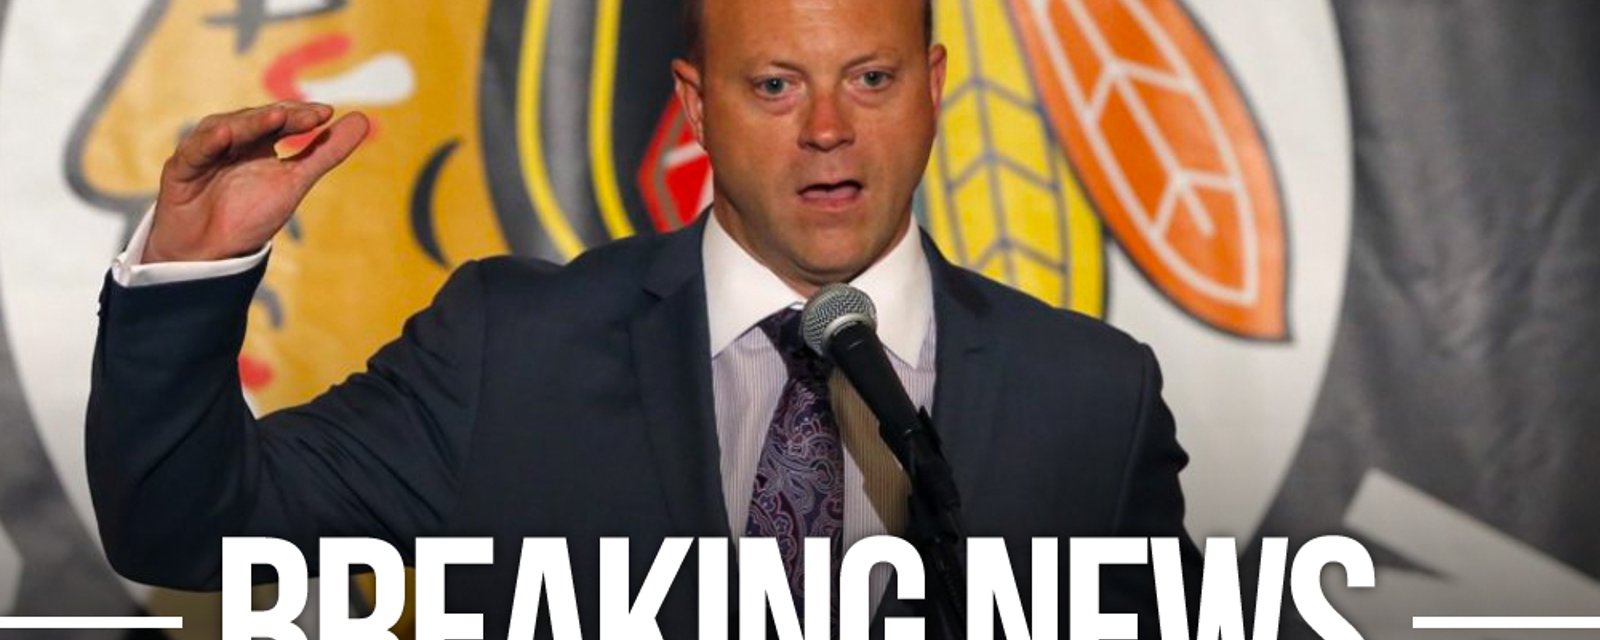 Blackhawks finally make a move with Stan Bowman, but fans are not having it